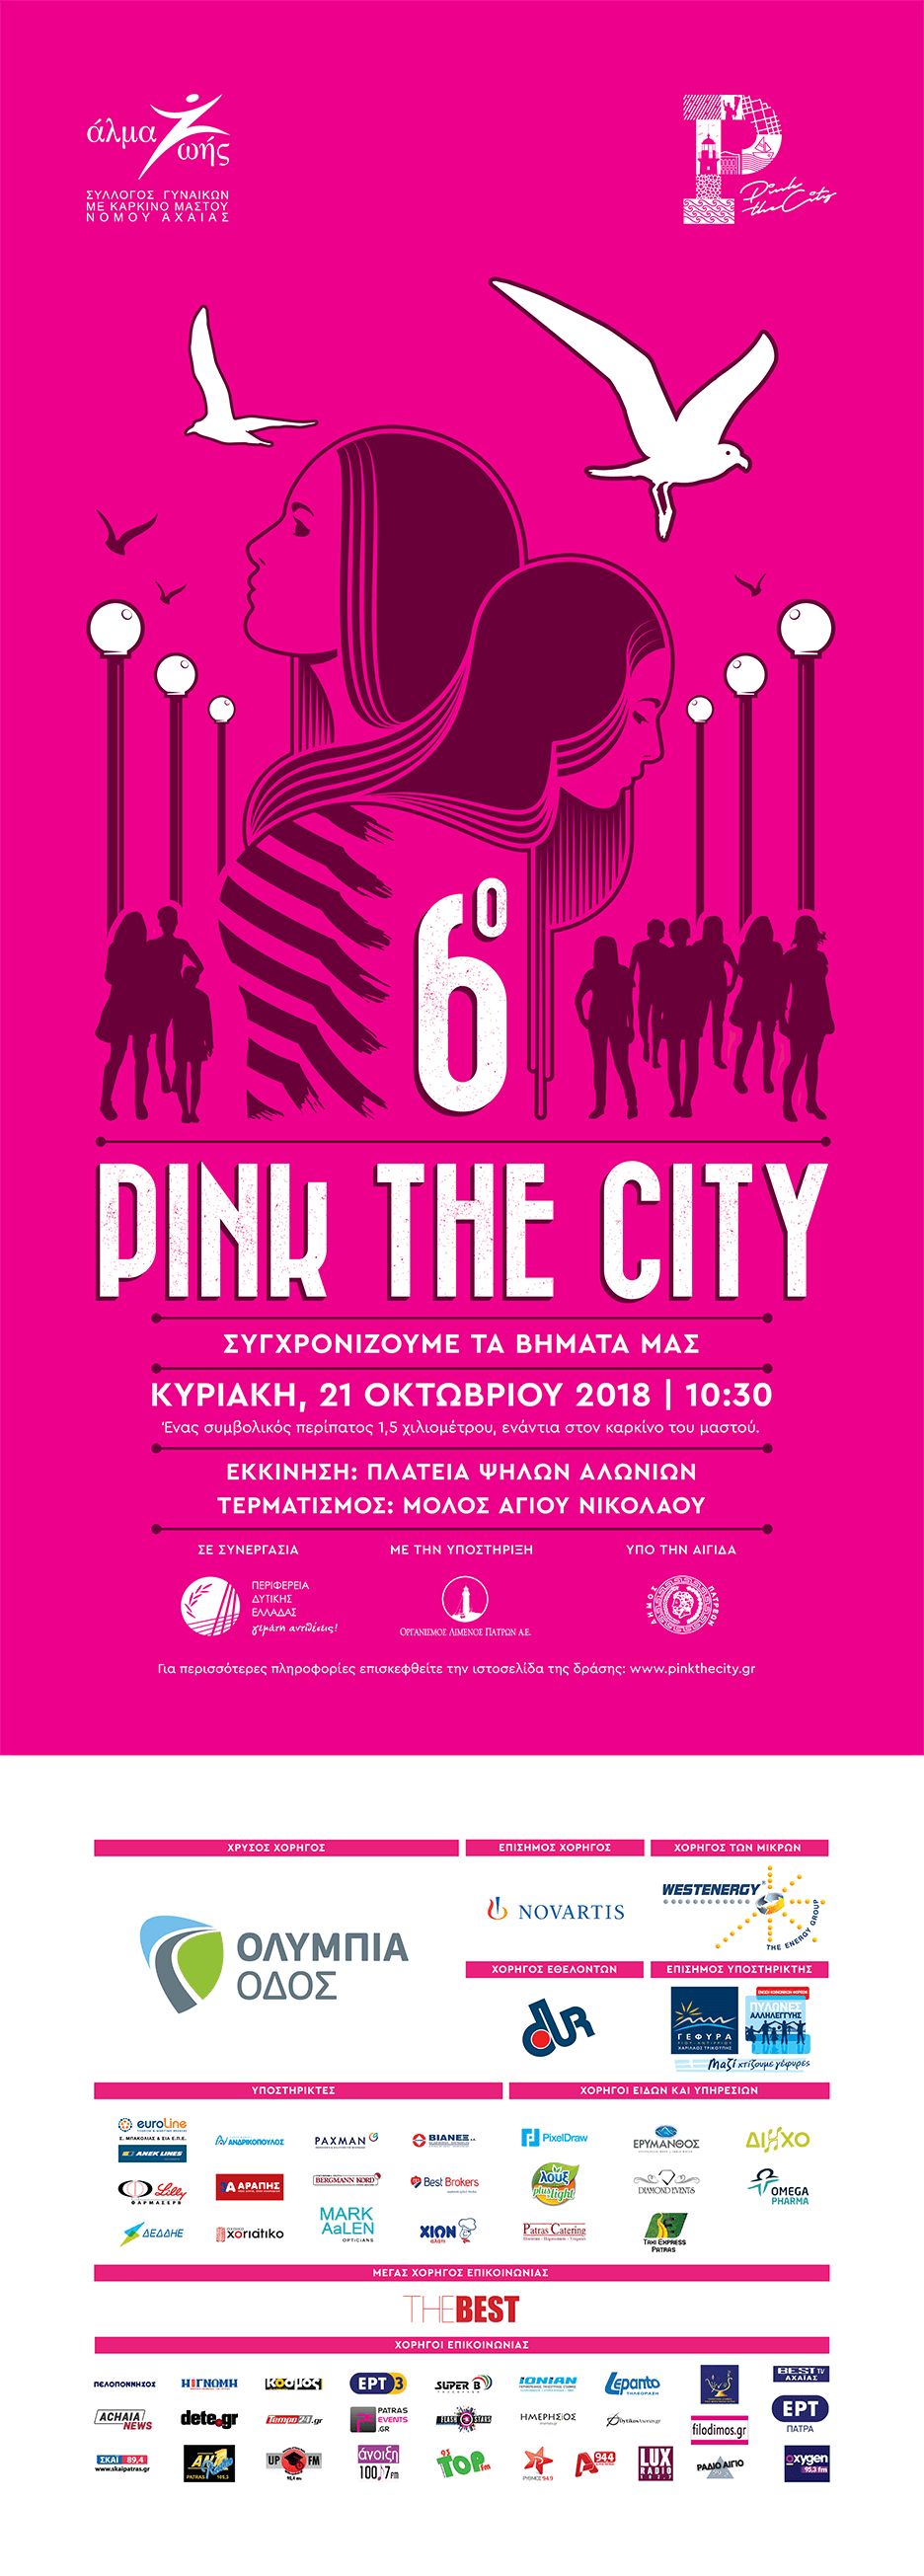 https://pinkthecity.gr/wp-content/uploads/2018/10/pink-the-city-2018-poster.png